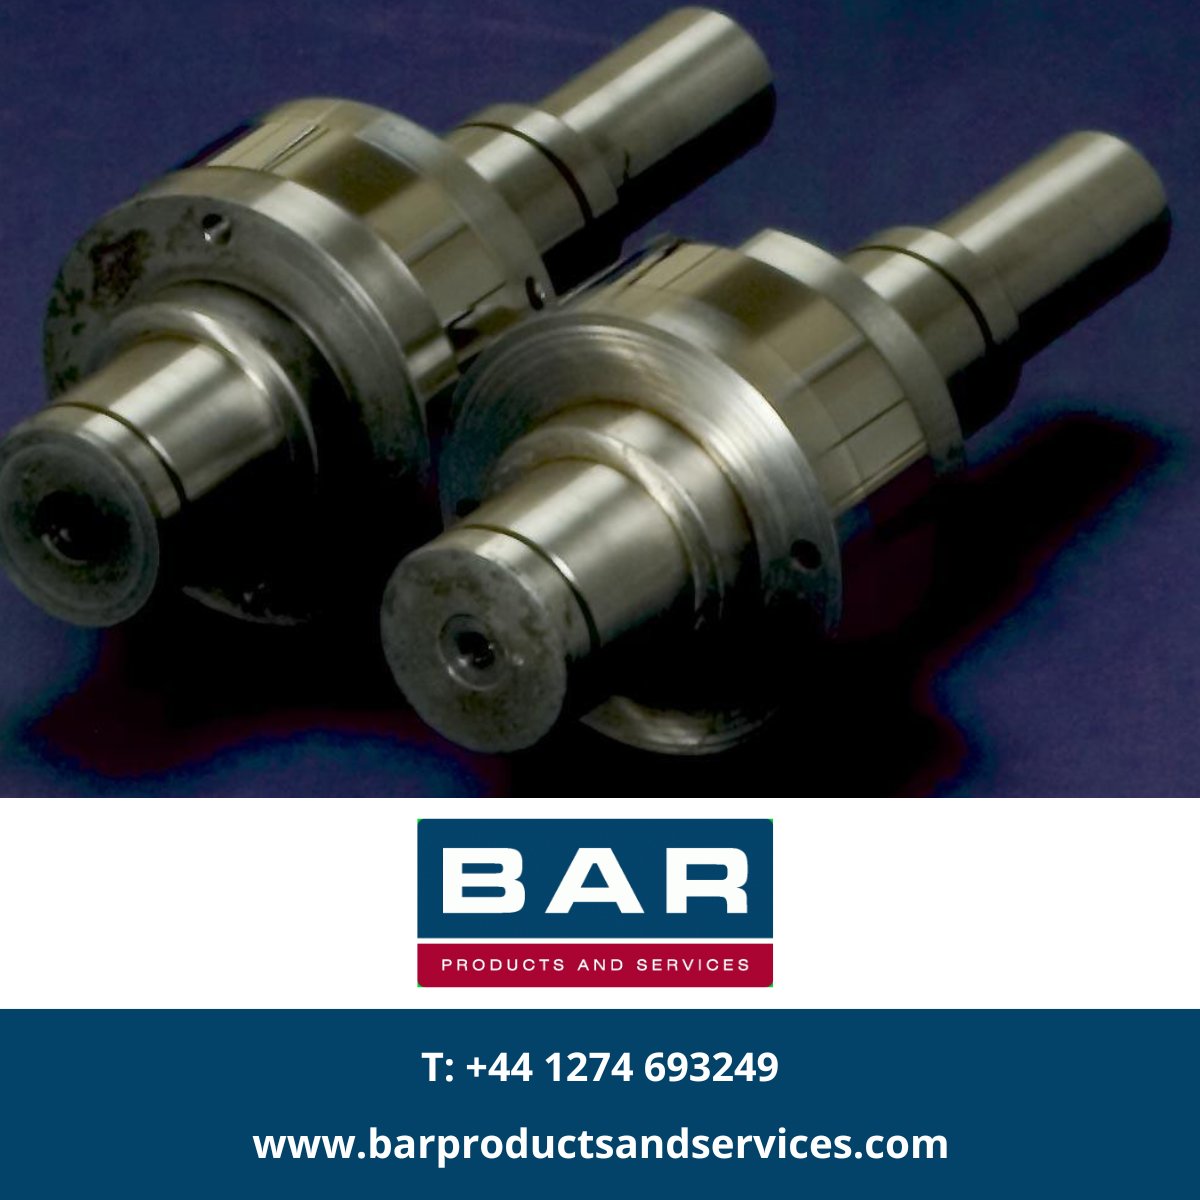 Our flattening rollers are manufactured within the ISO9001 Quality System; manufactured with a Tungsten Carbide belt mounted on high-grade steel shafts. Click here: barproductsandservices.com/flattening-rol… #flatteningroller #iso9001 #quality #highgradesteel #steel #engineering #manufacturing